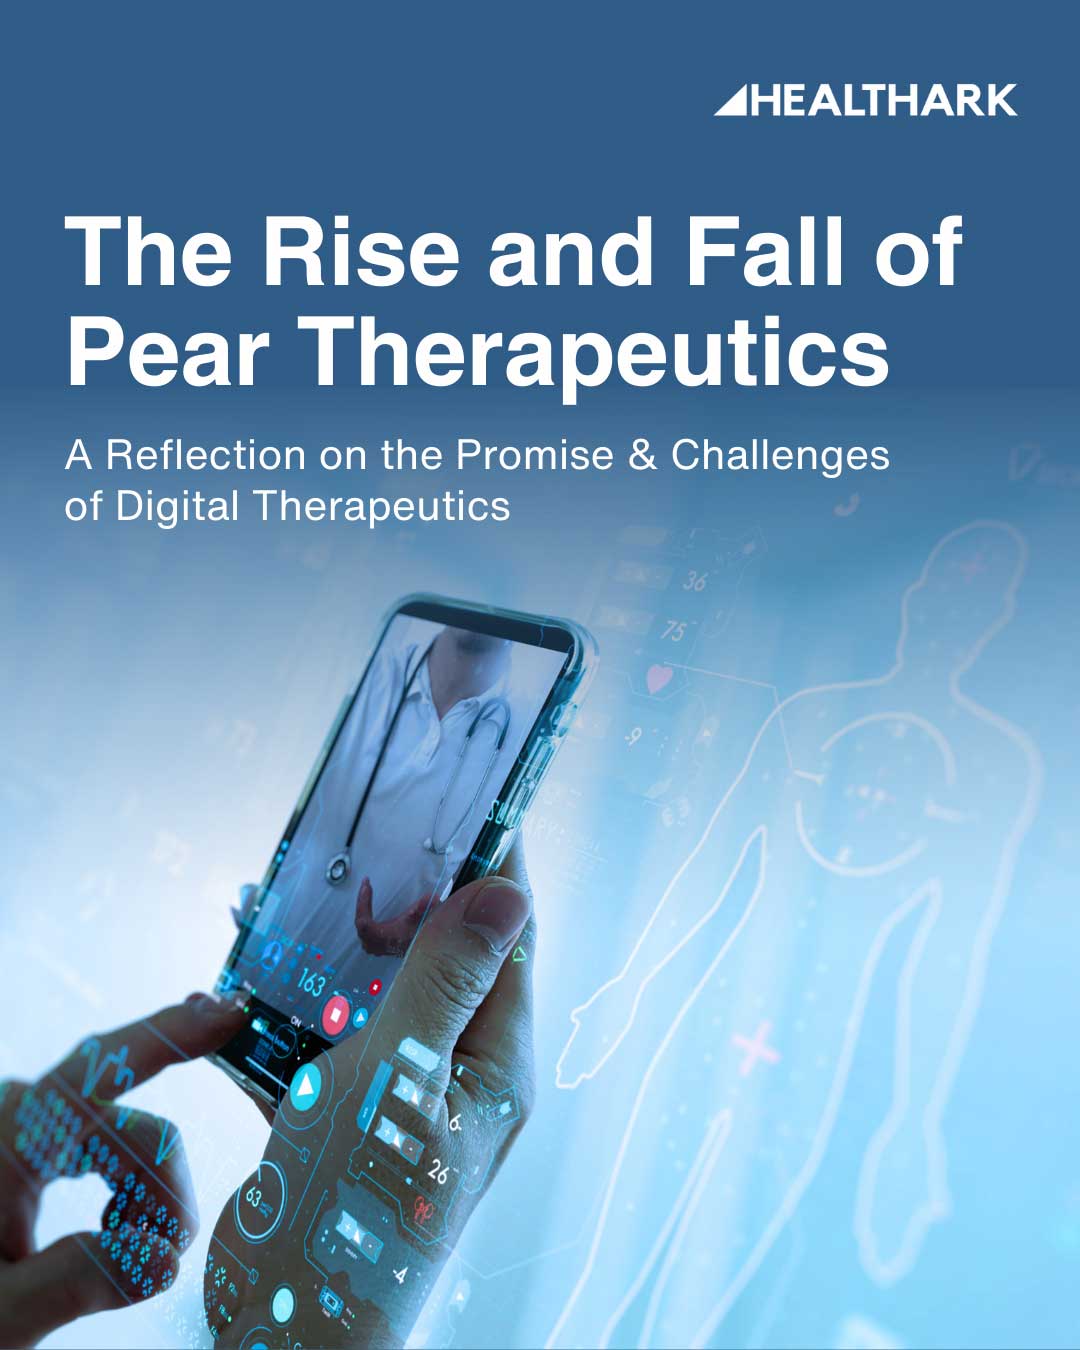 The Rise and Fall of Pear Therapeutics